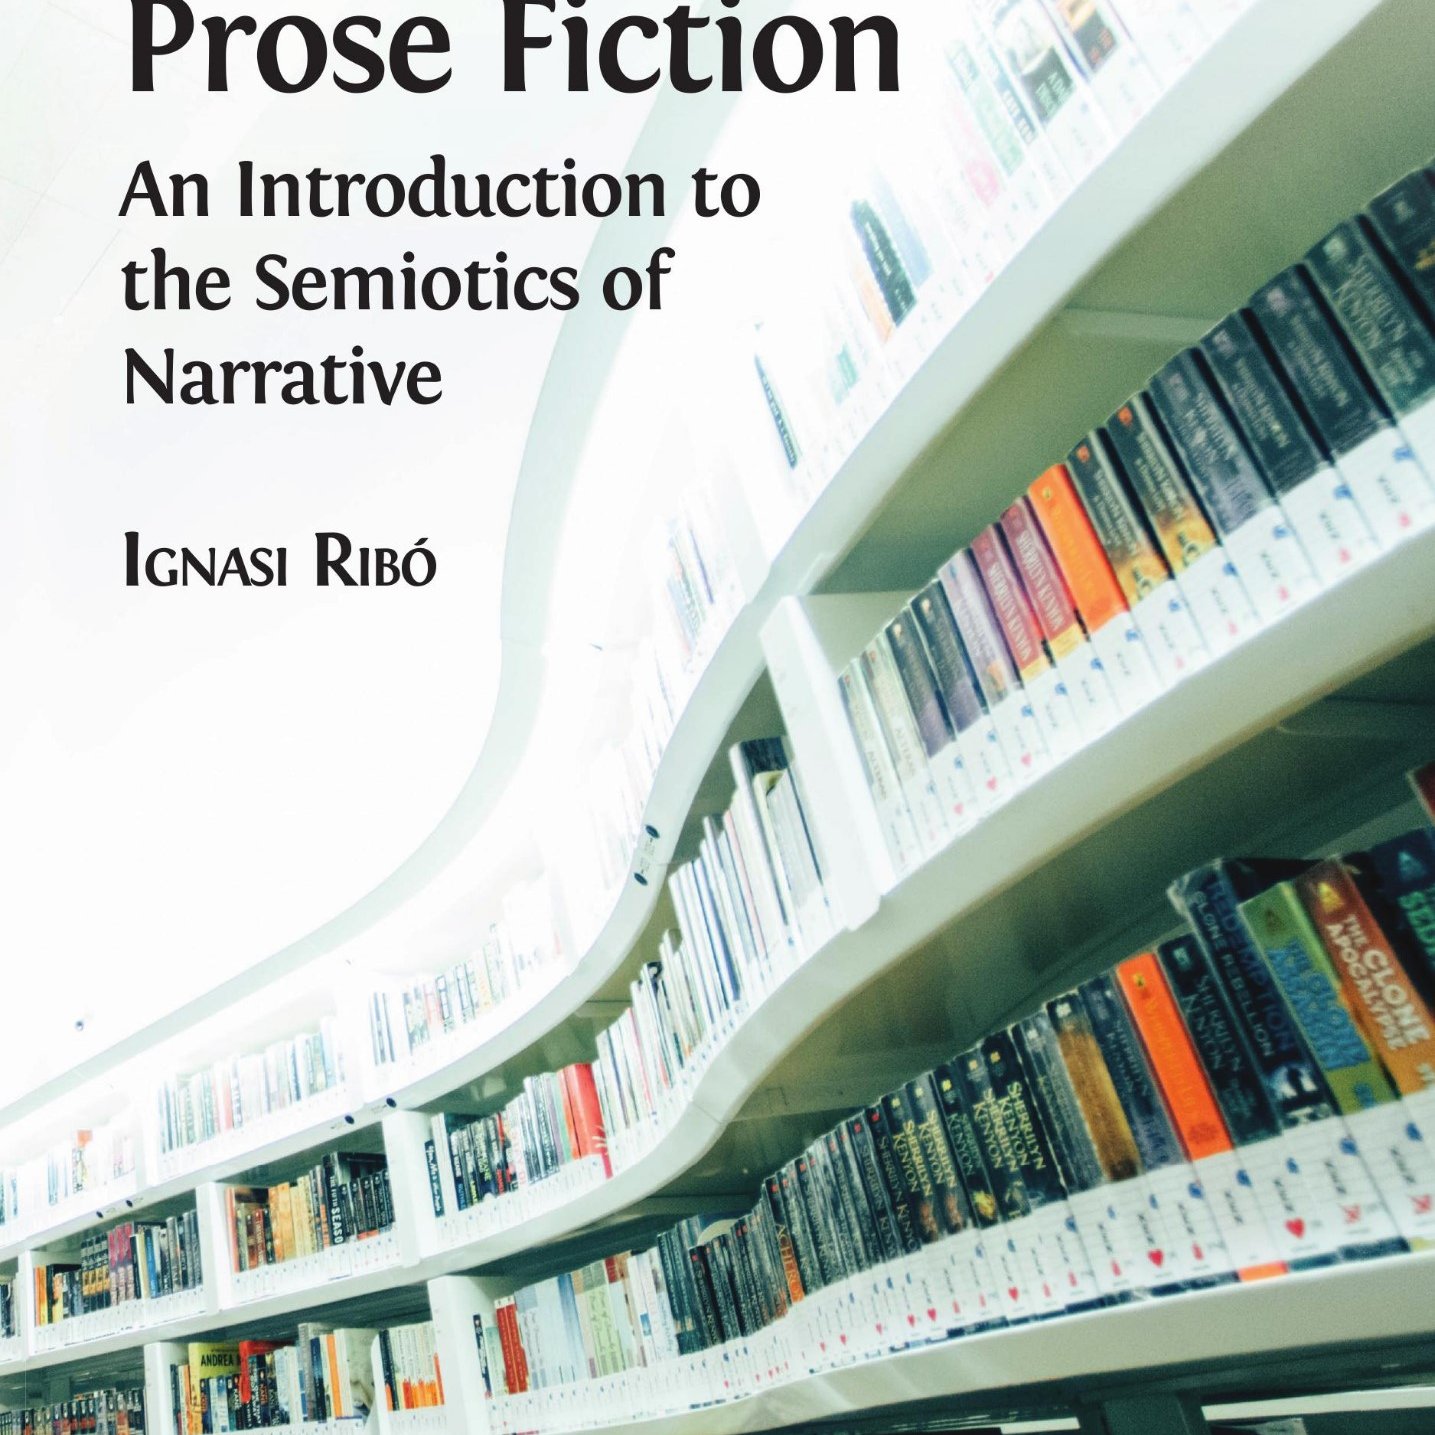 Prose Fiction. An Introduction to the Semiotics of Narrative